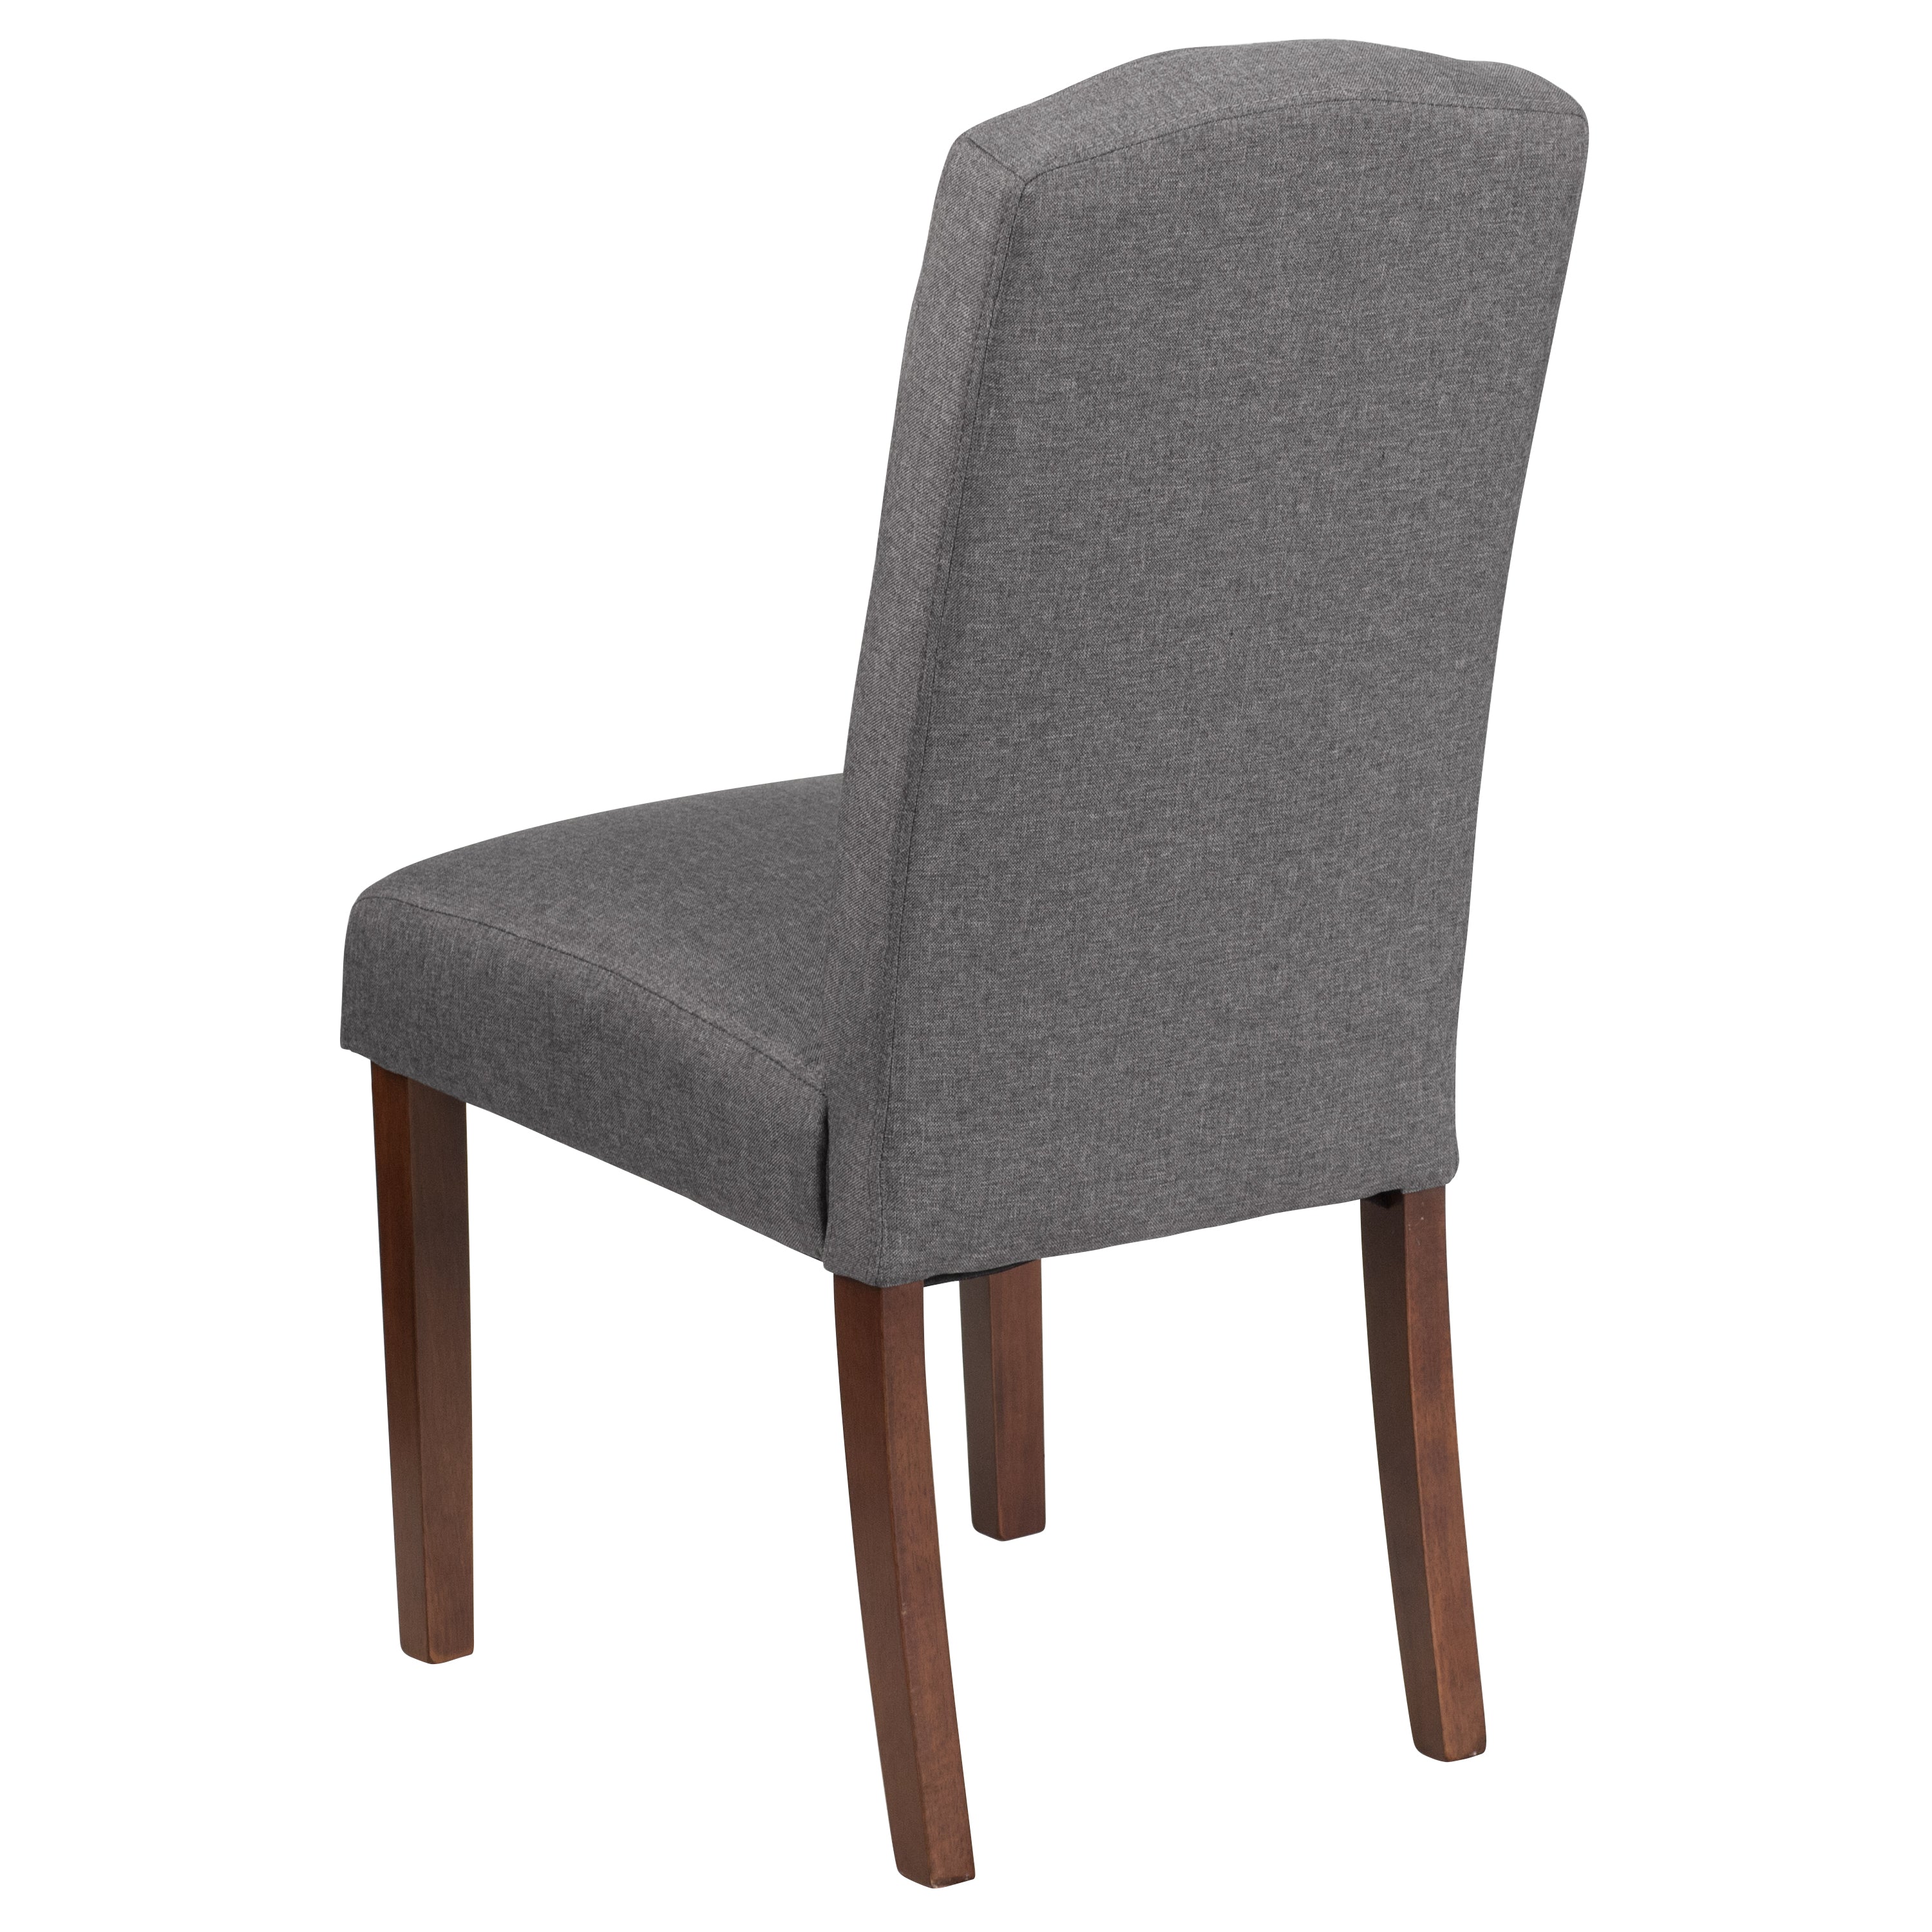 HERCULES Grove Park Series Diamond Patterned Button Tufted Parsons Chair-Dining Chair-Flash Furniture-Wall2Wall Furnishings